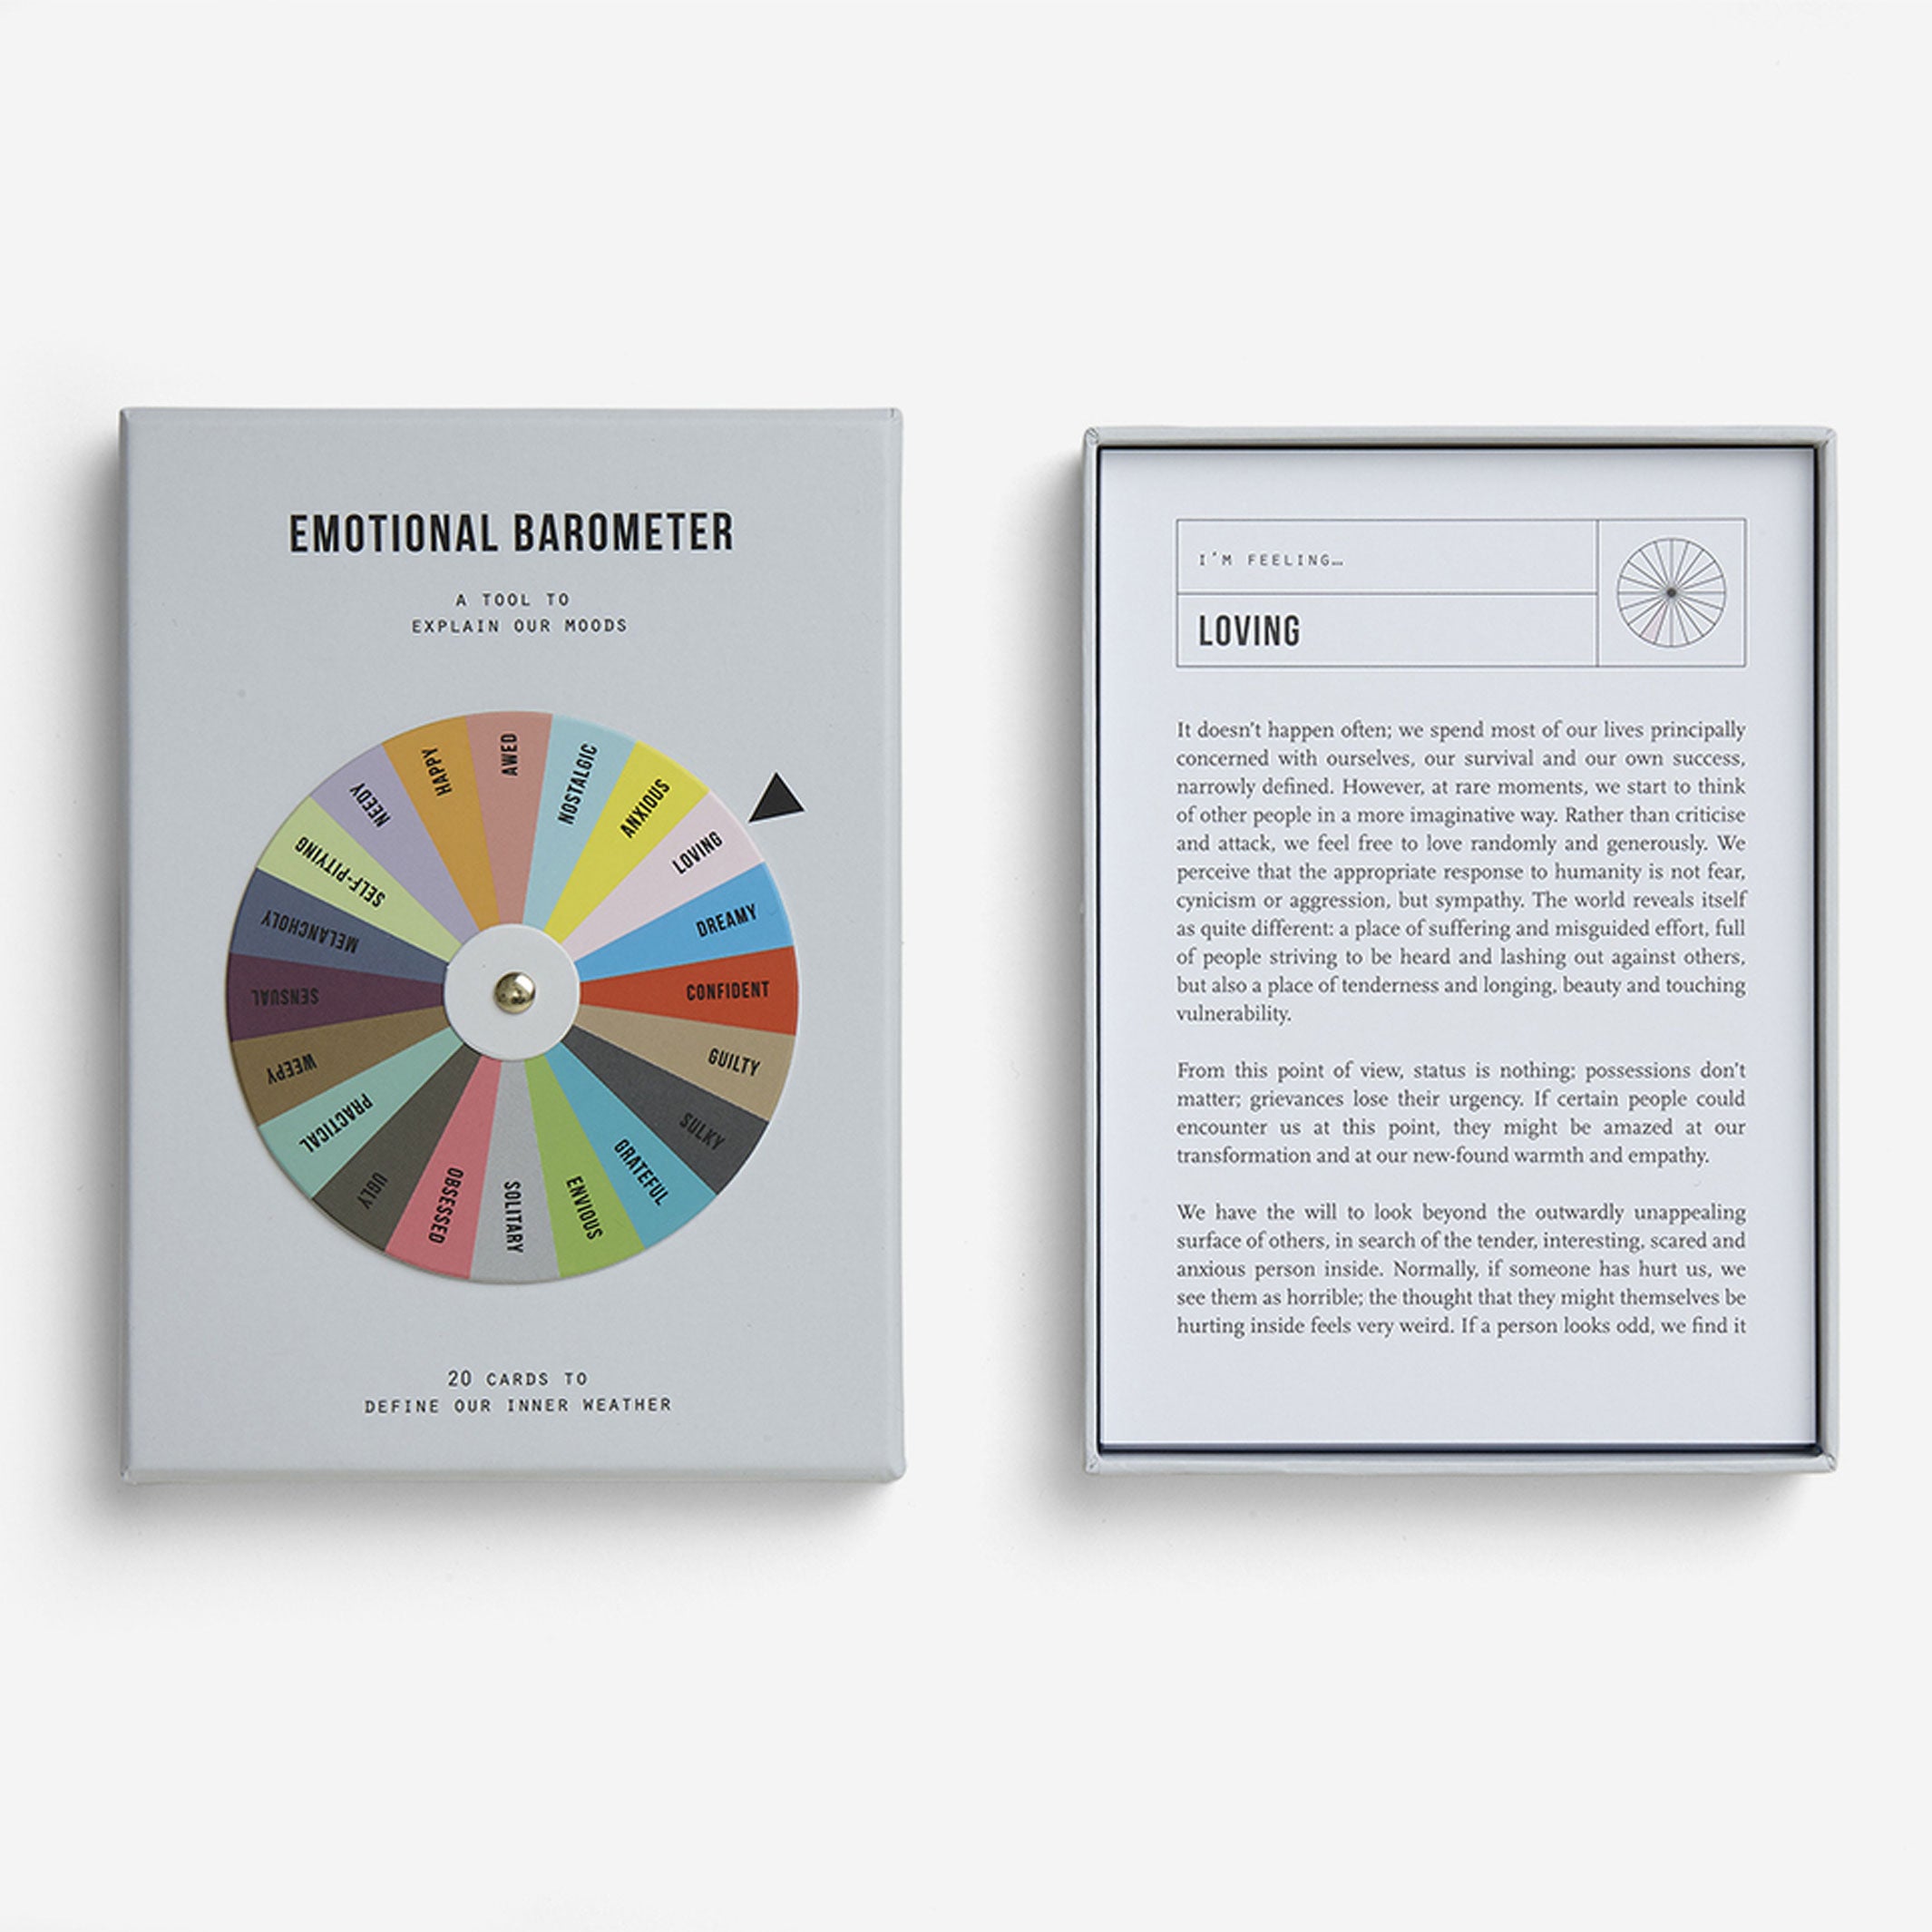 EMOTIONAL BAROMETER | CARD GAME to Explain Our Moods | English Edition | The School of Life